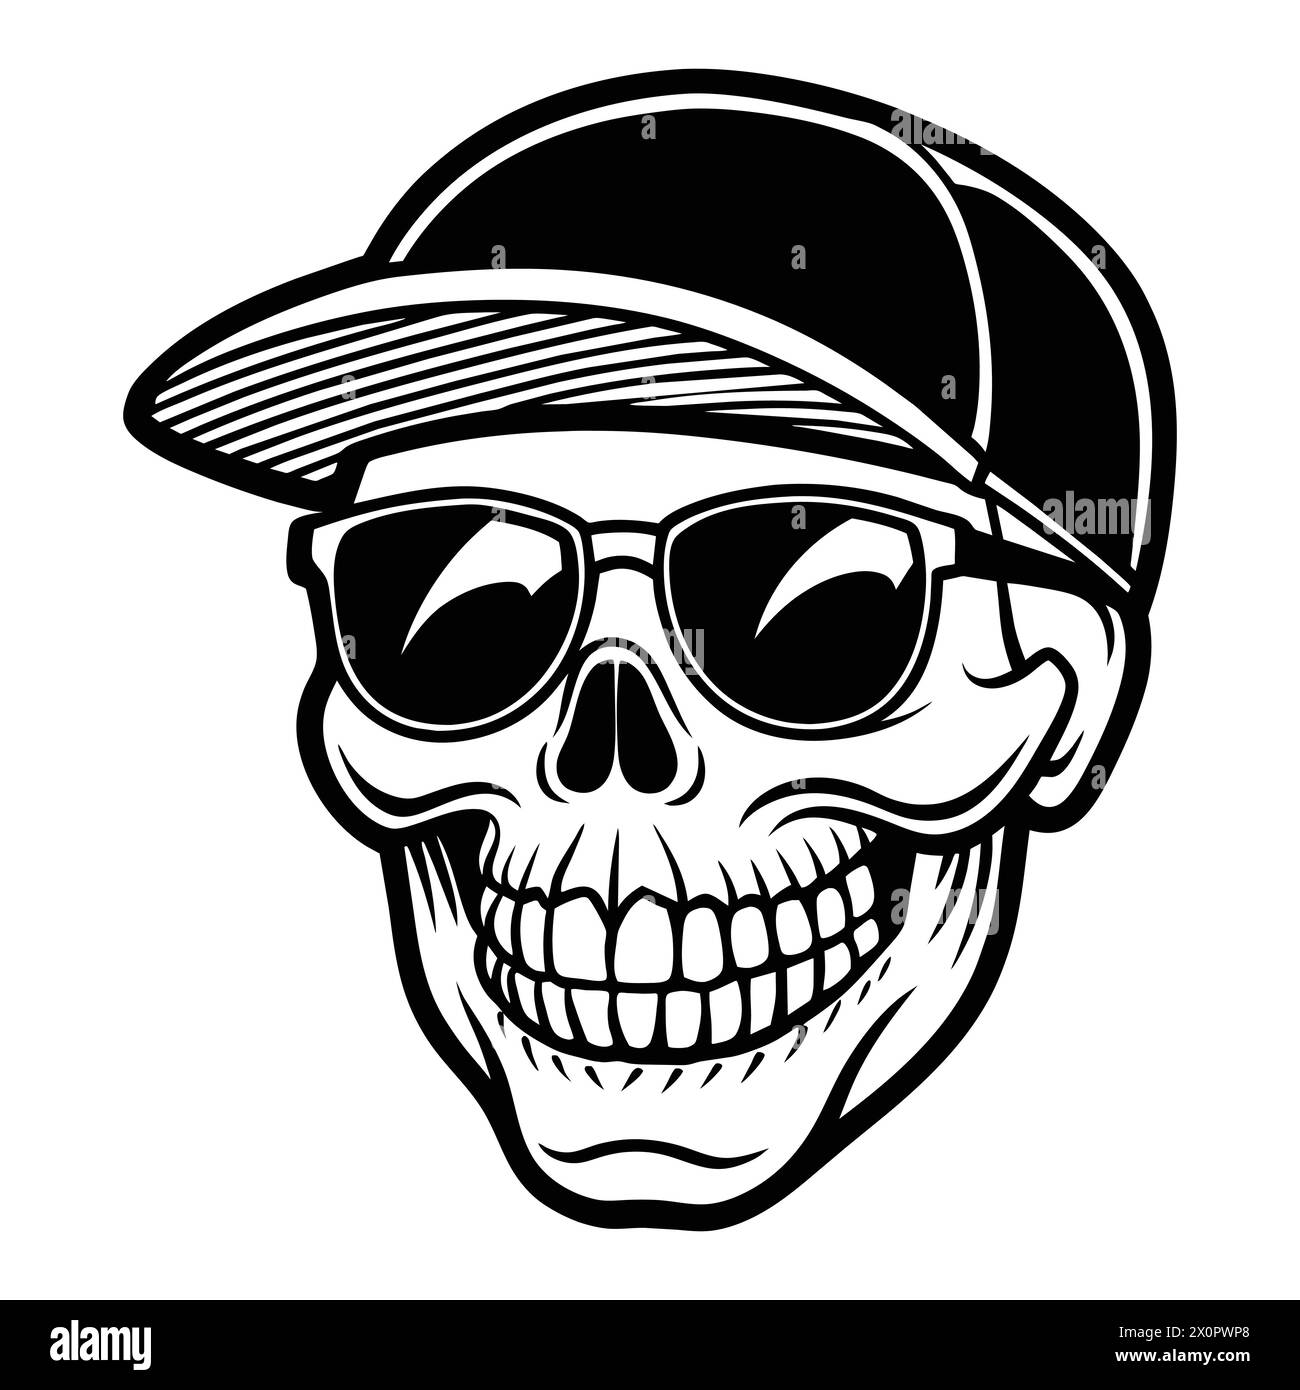 'Smiling Skull with Sunglasses and Cap - Cool Hipster Skeleton Portrait for Trendy Designs and Halloween Concepts' Stock Vector